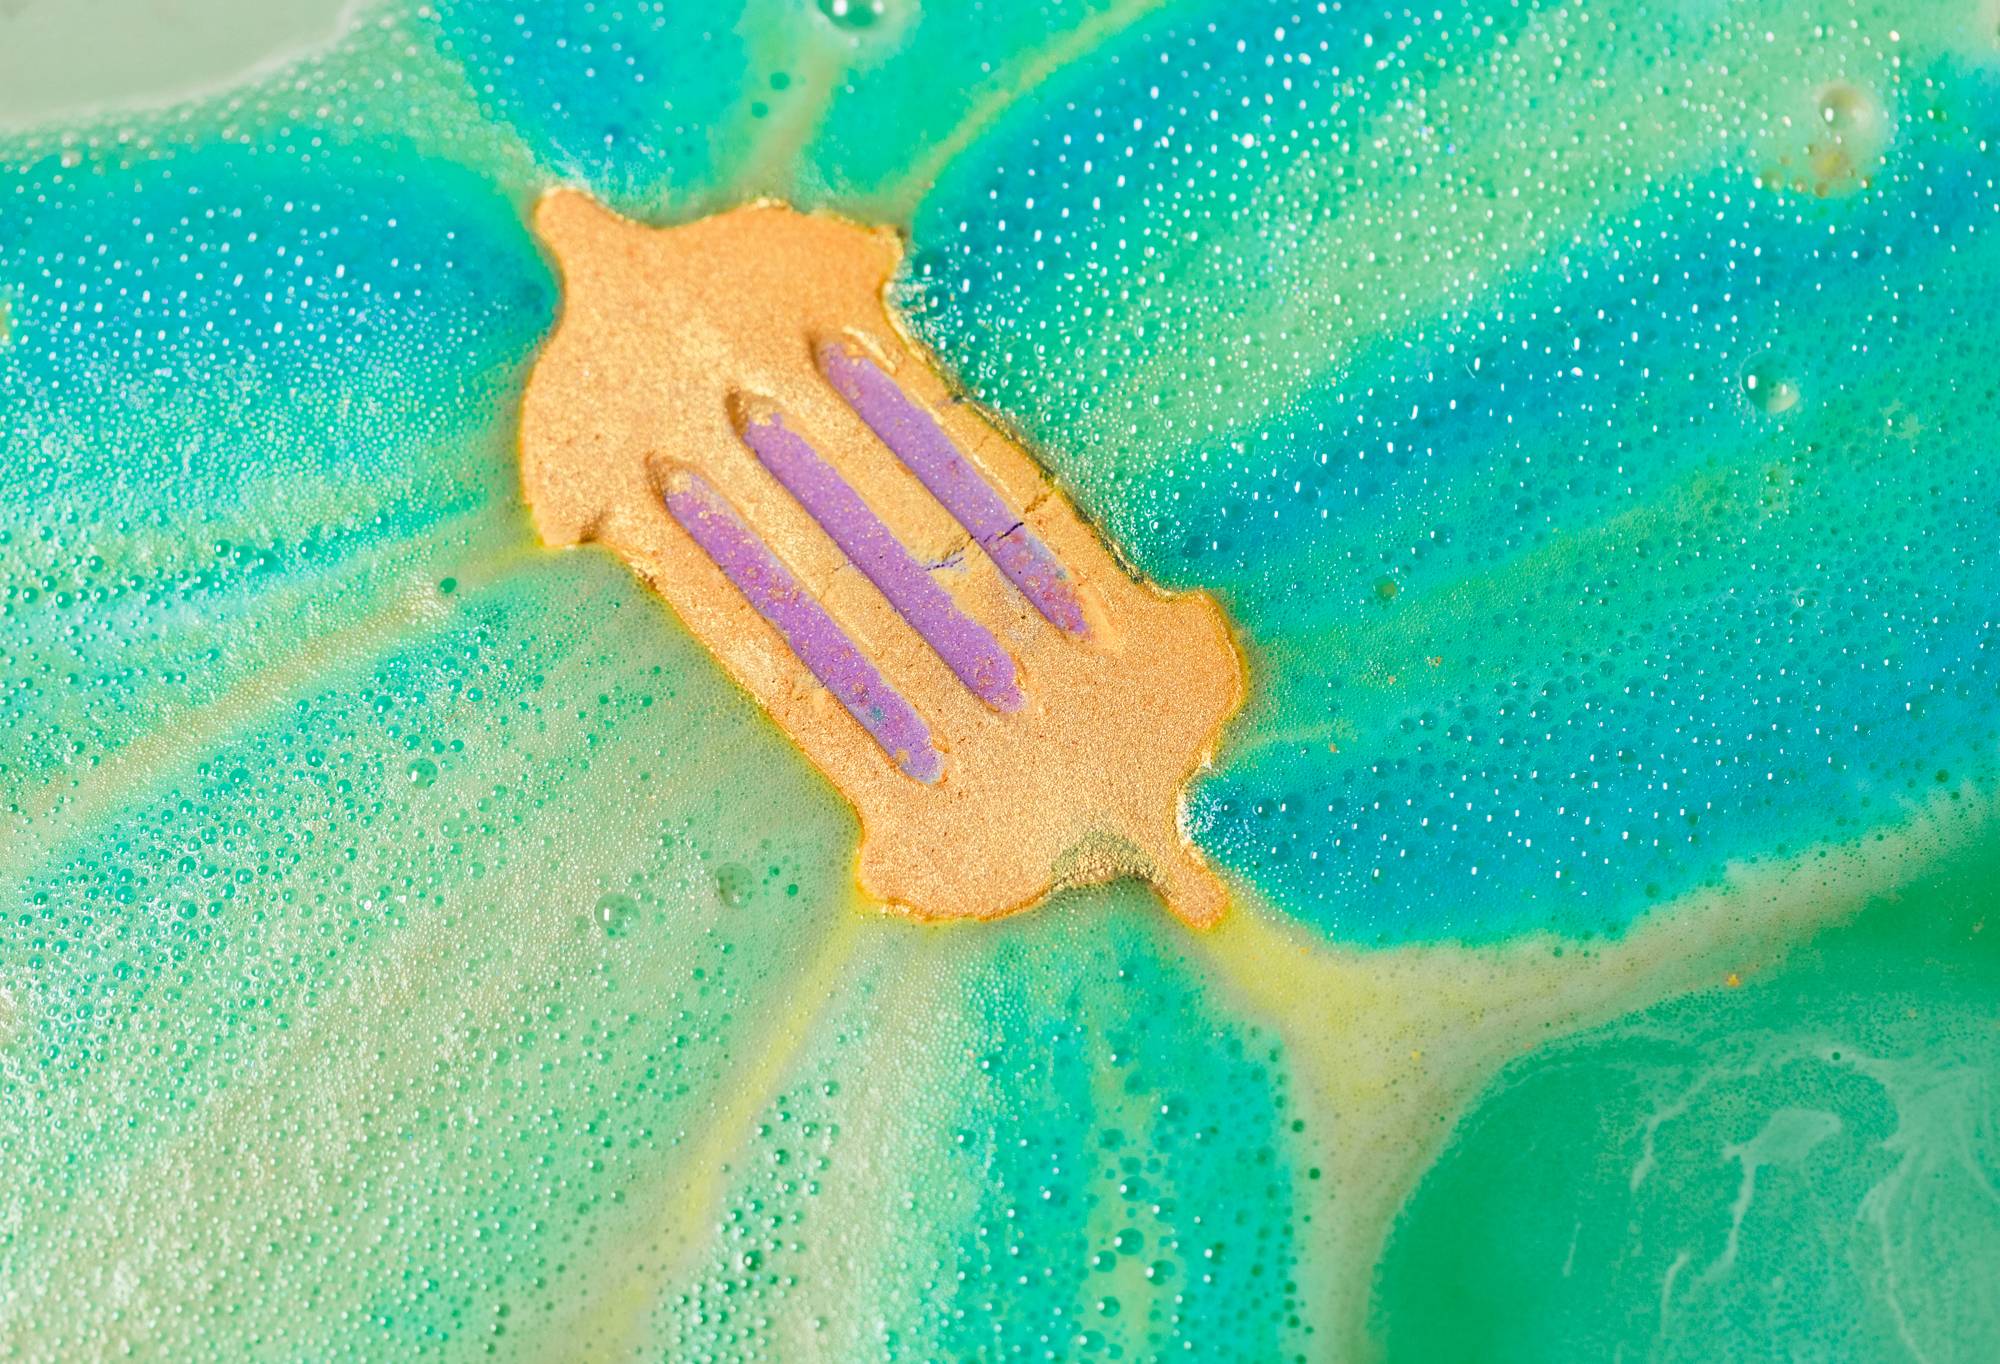 The bath bomb floats face up in green water, fizzing away and giving off light green and blue streaks.